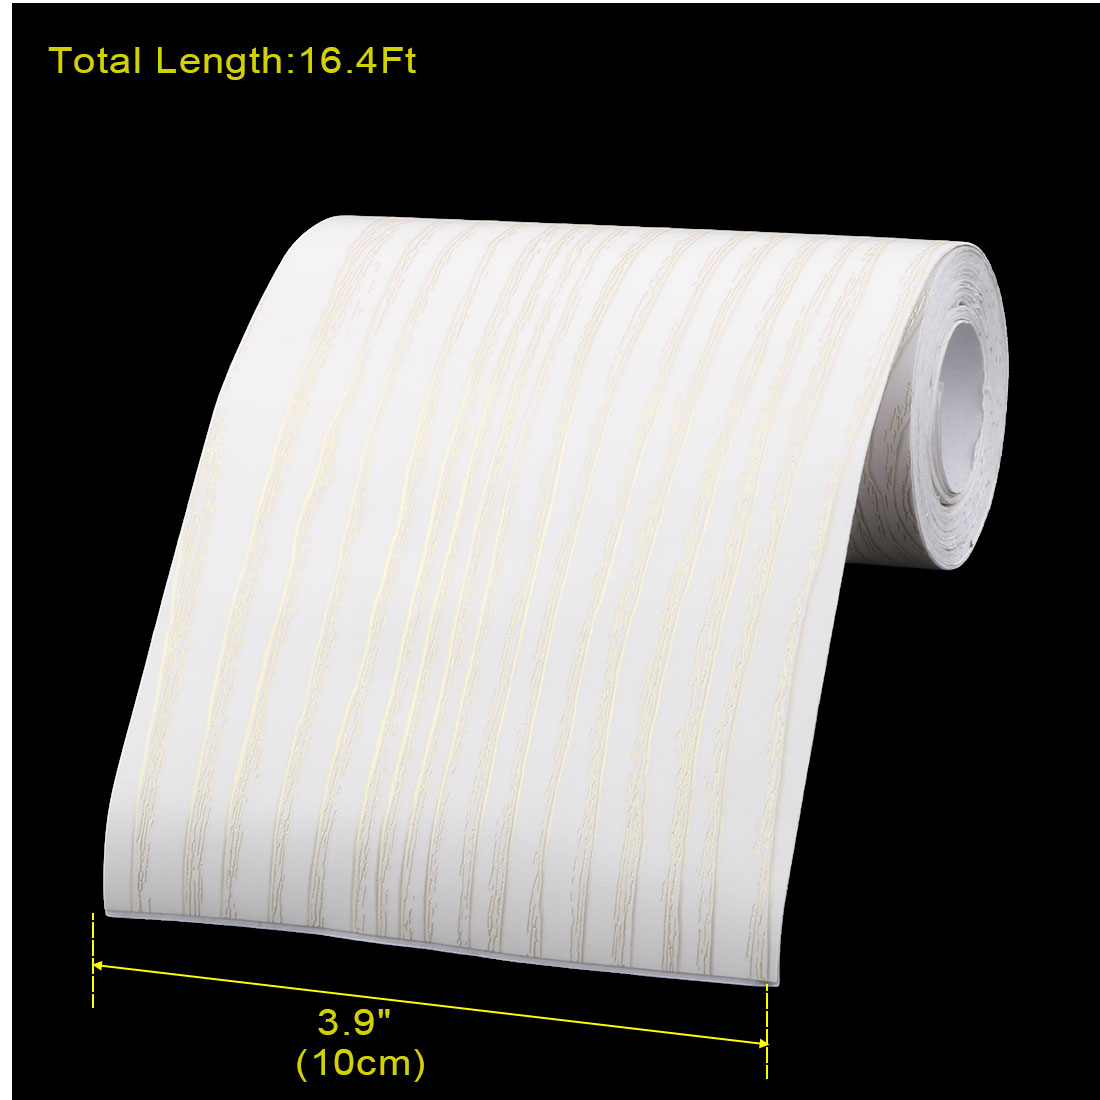 Unique Bargains Home Wooden Pattern Skirting Wall Waist Line Border Sticker Wood Color 16.4Ft